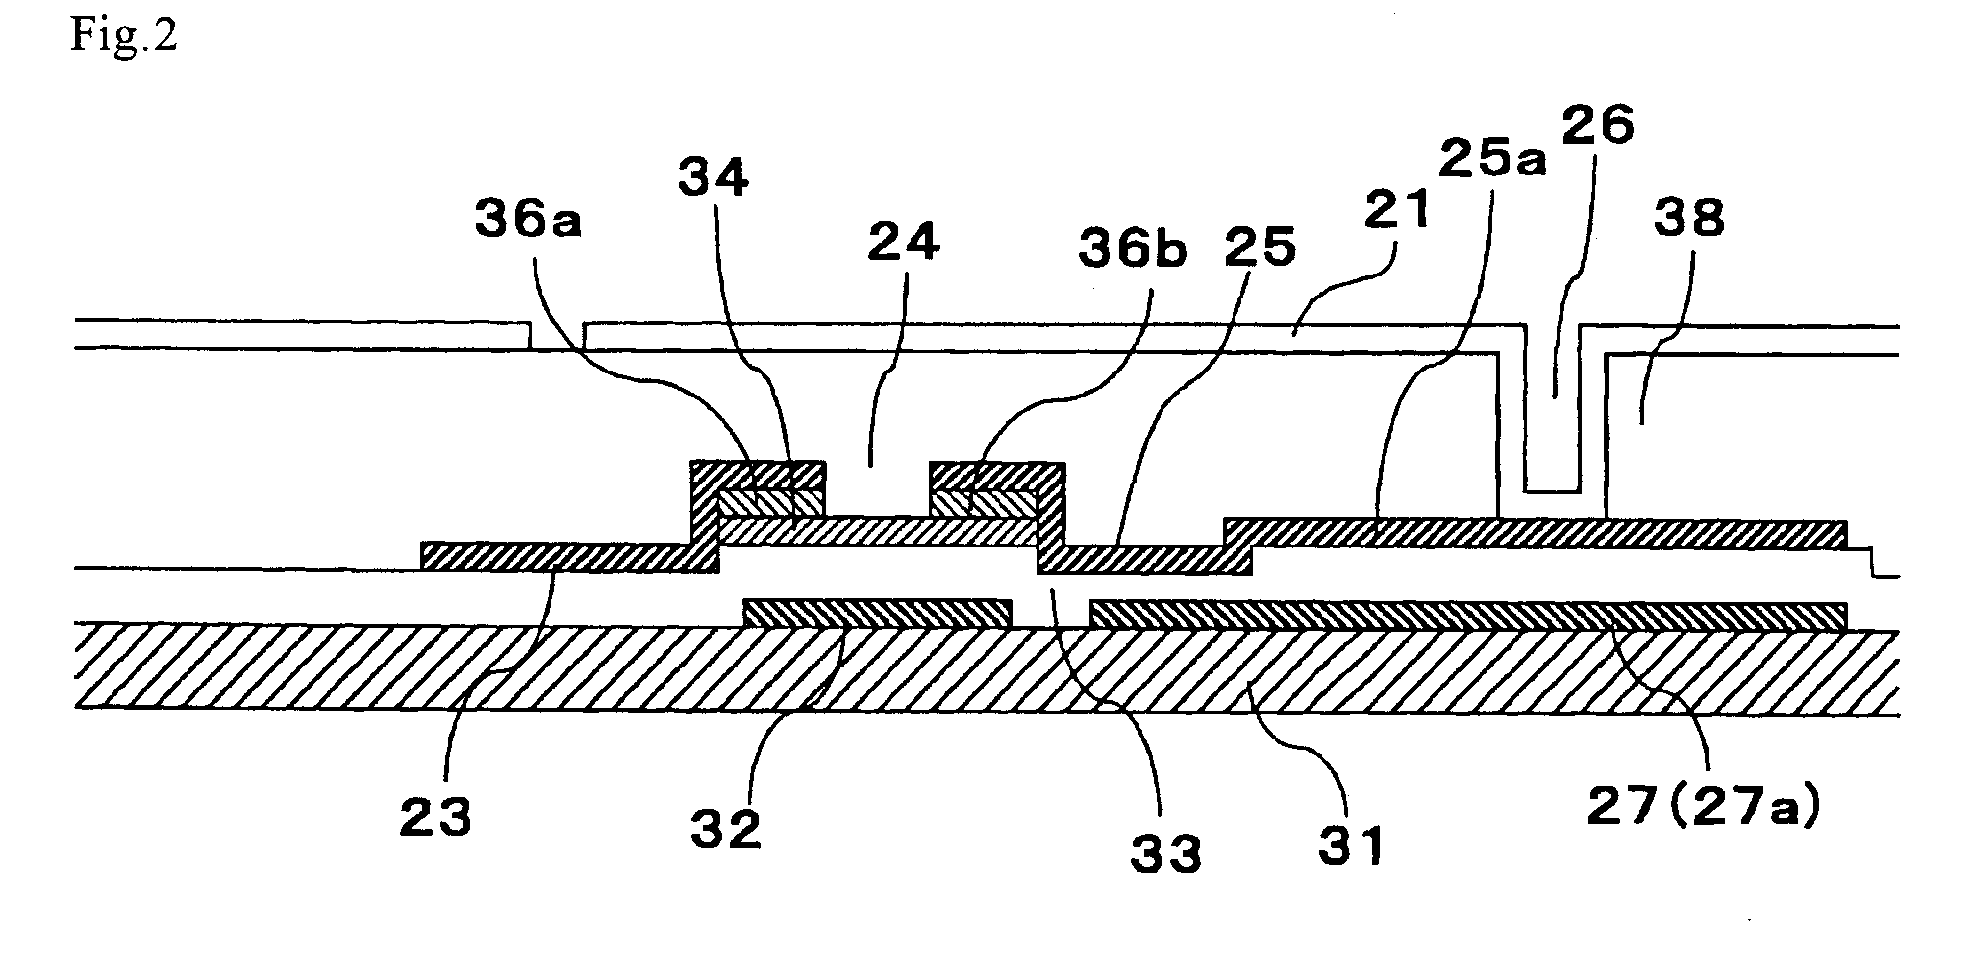 Active matrix substrate where a portion of the storage capacitor wiring or the scanning signal line overlaps with the drain lead-out wiring connected to the drain electrode of a thin film transistor and display device having such an active matrix substrate